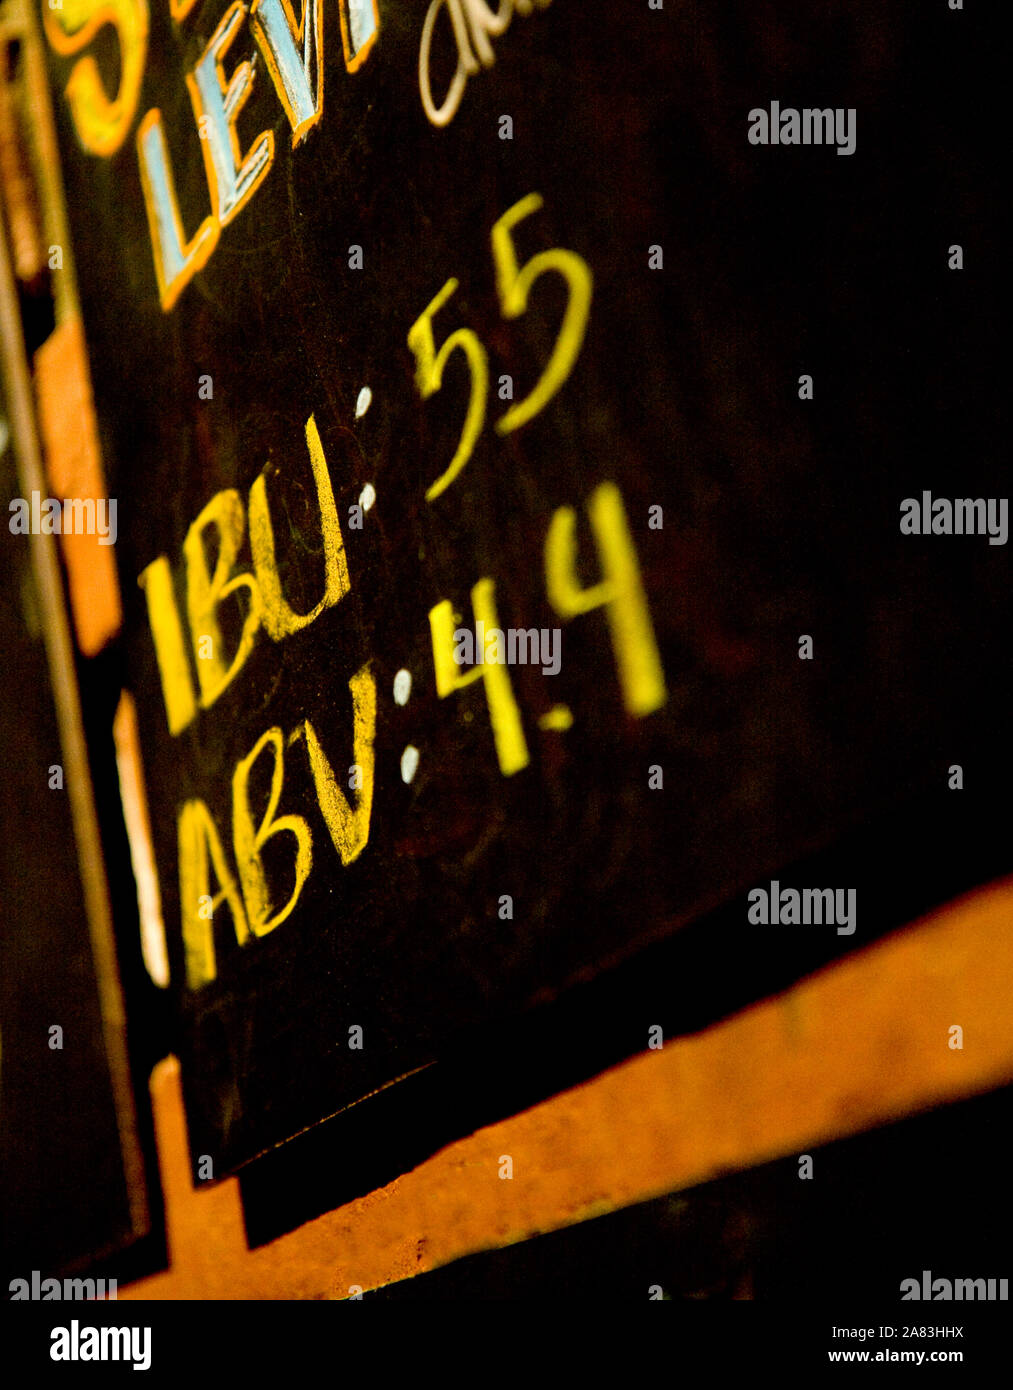 Close up of Chalkboard sign in restaurant with IBU and ABV information for beers. Stock Photo